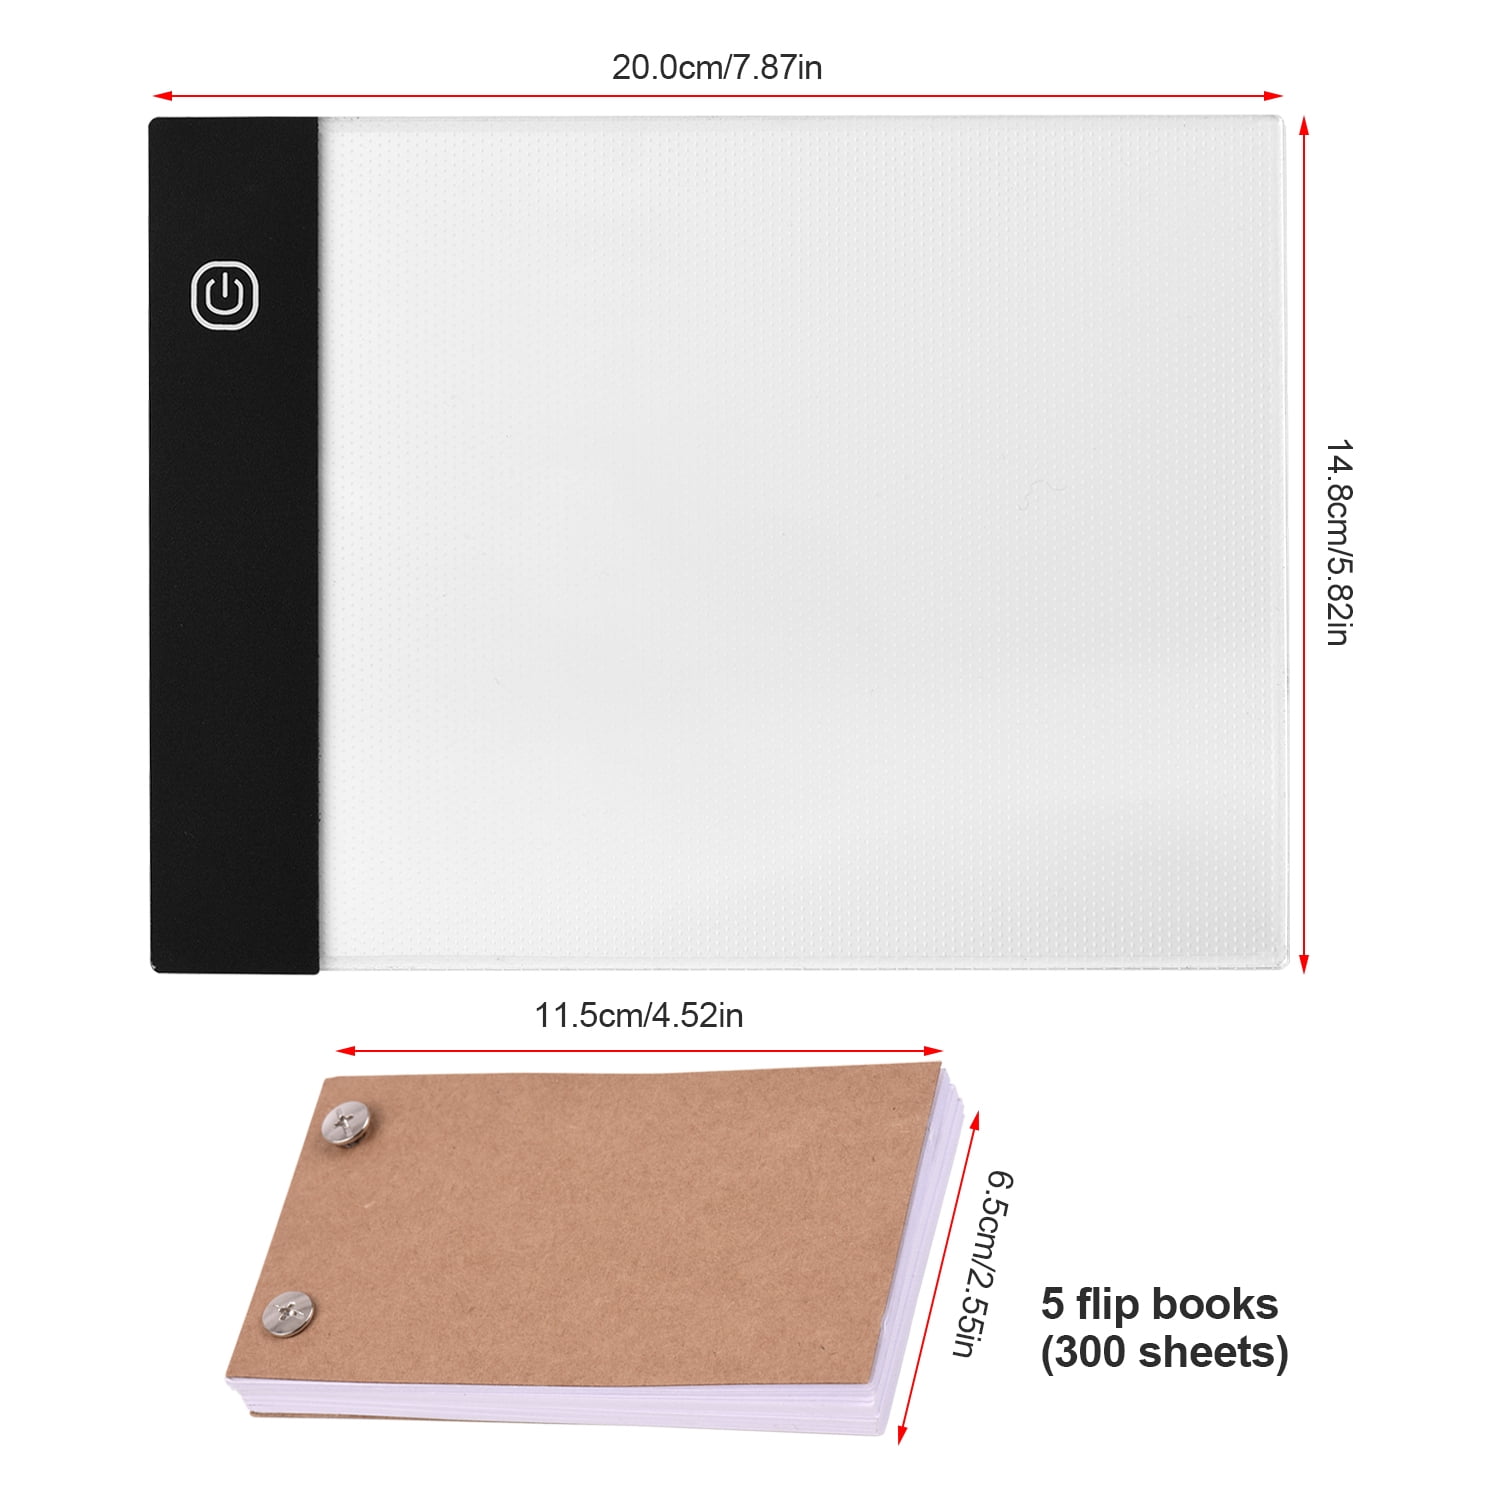  Flipbook Kit,Funien Flip Book Kit with Mini LED Light Pad Hole  Design 3 Level Brightness Control Light Box 300 Sheets Animation Paper  Flipbook Binding Screws for Drawing Tracing Sketching